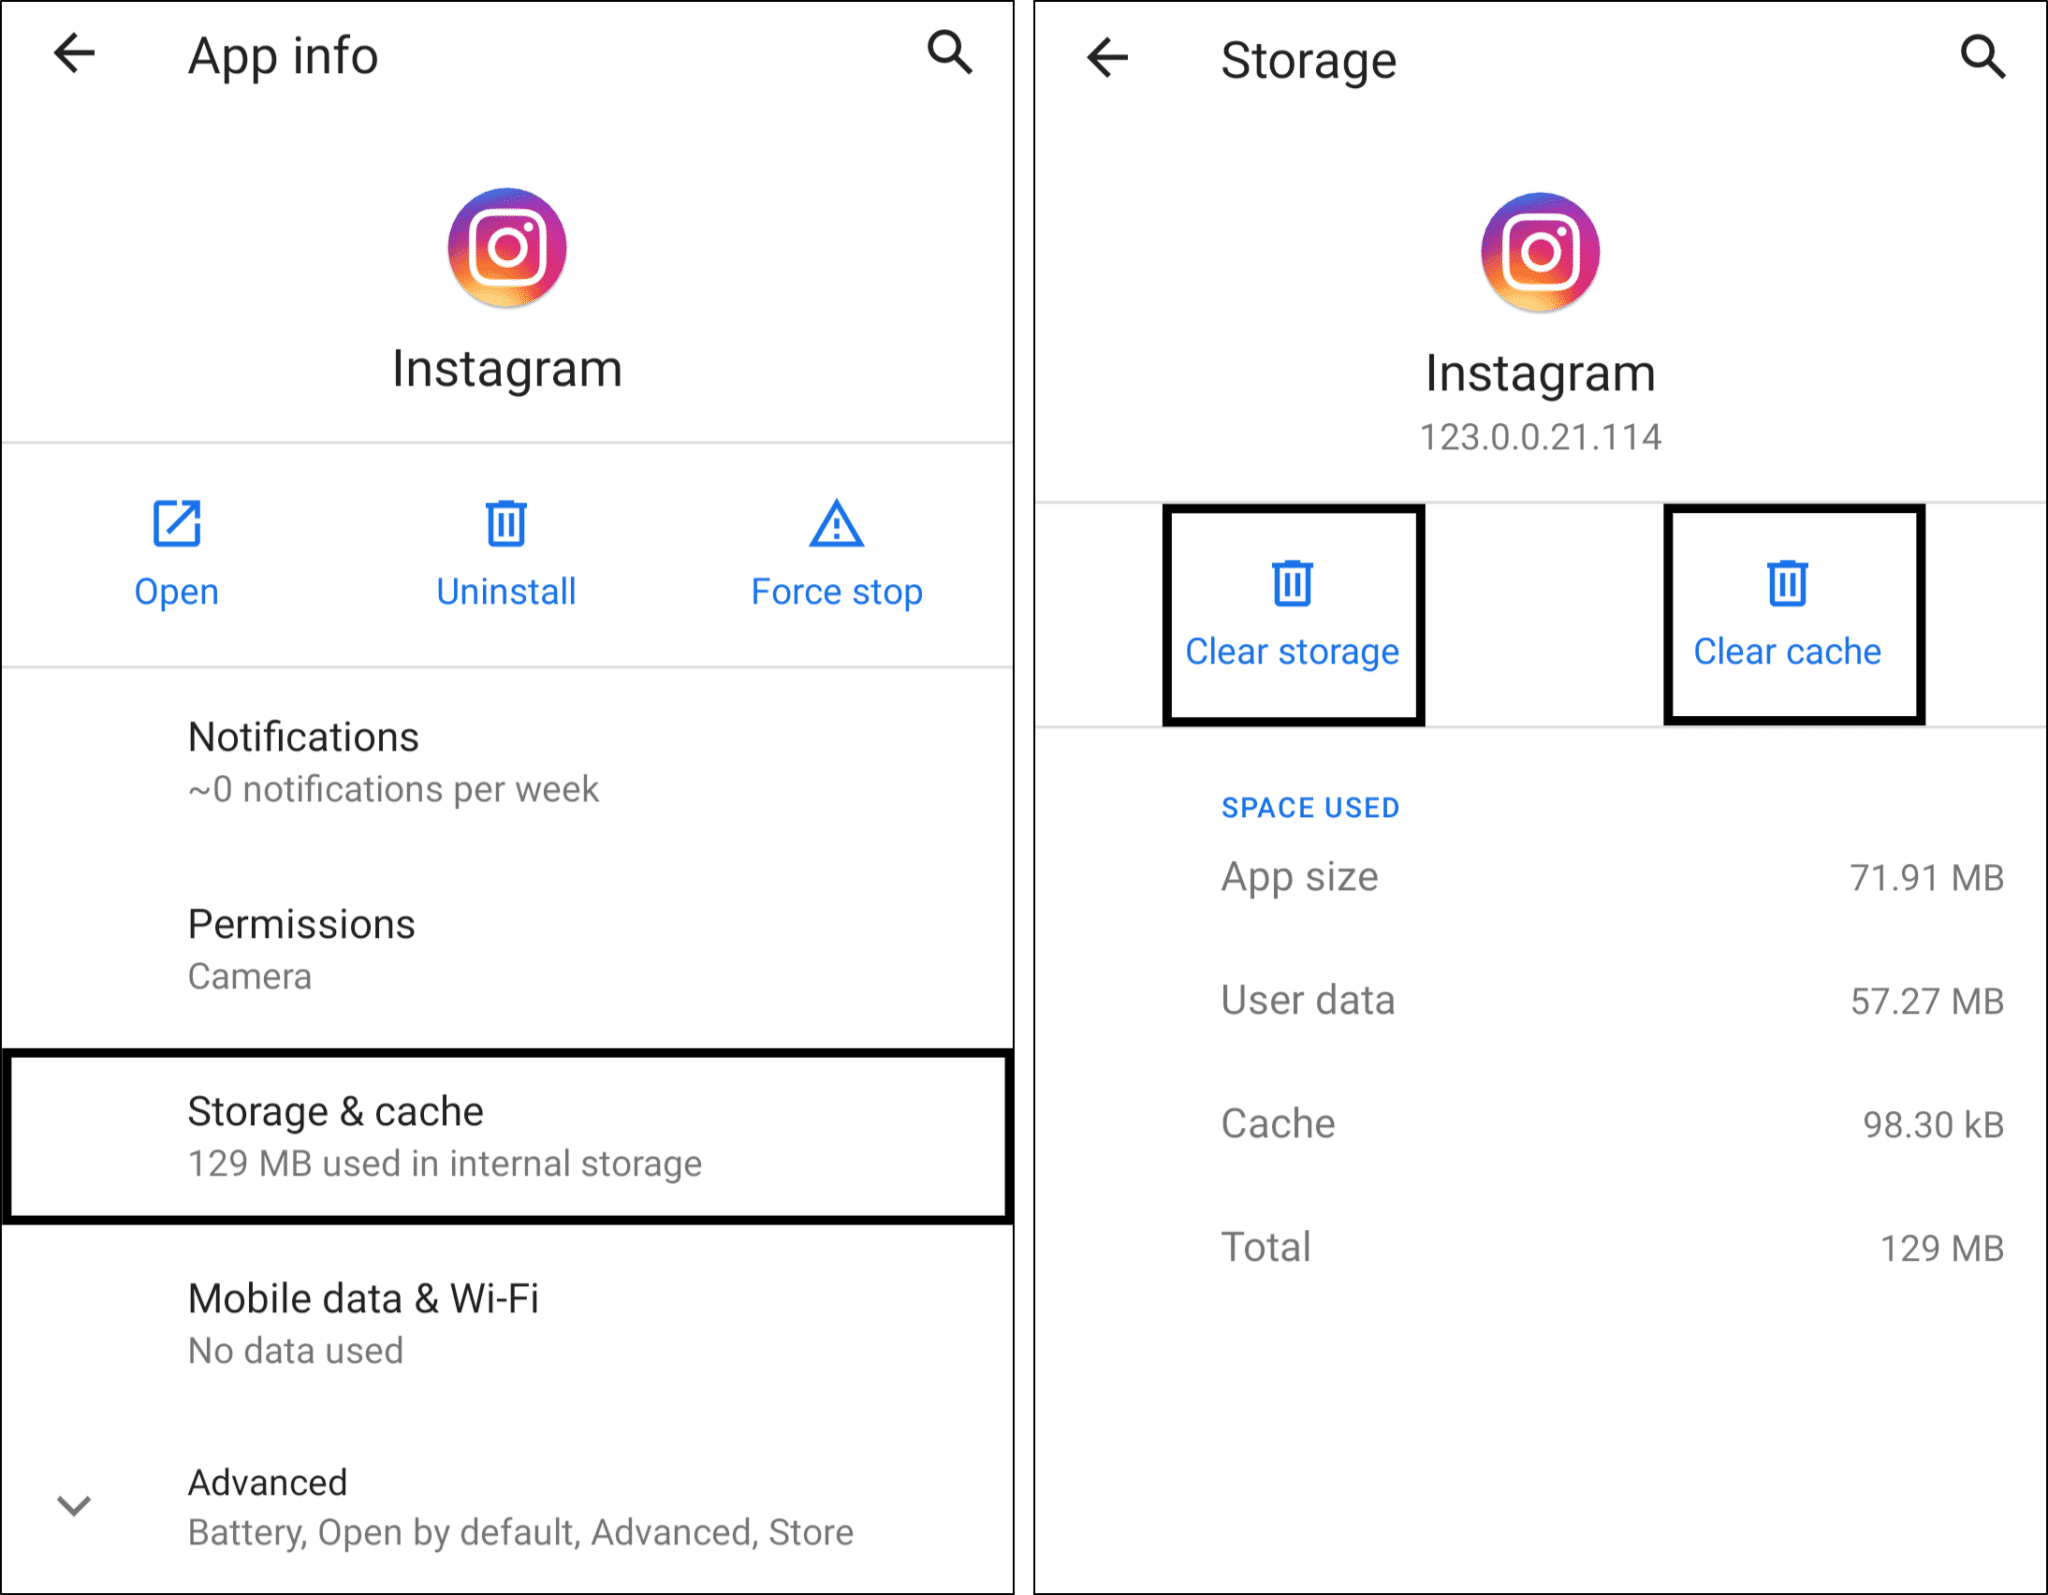 clear instagram cache and app data on android to fix no sound on Instagram stories